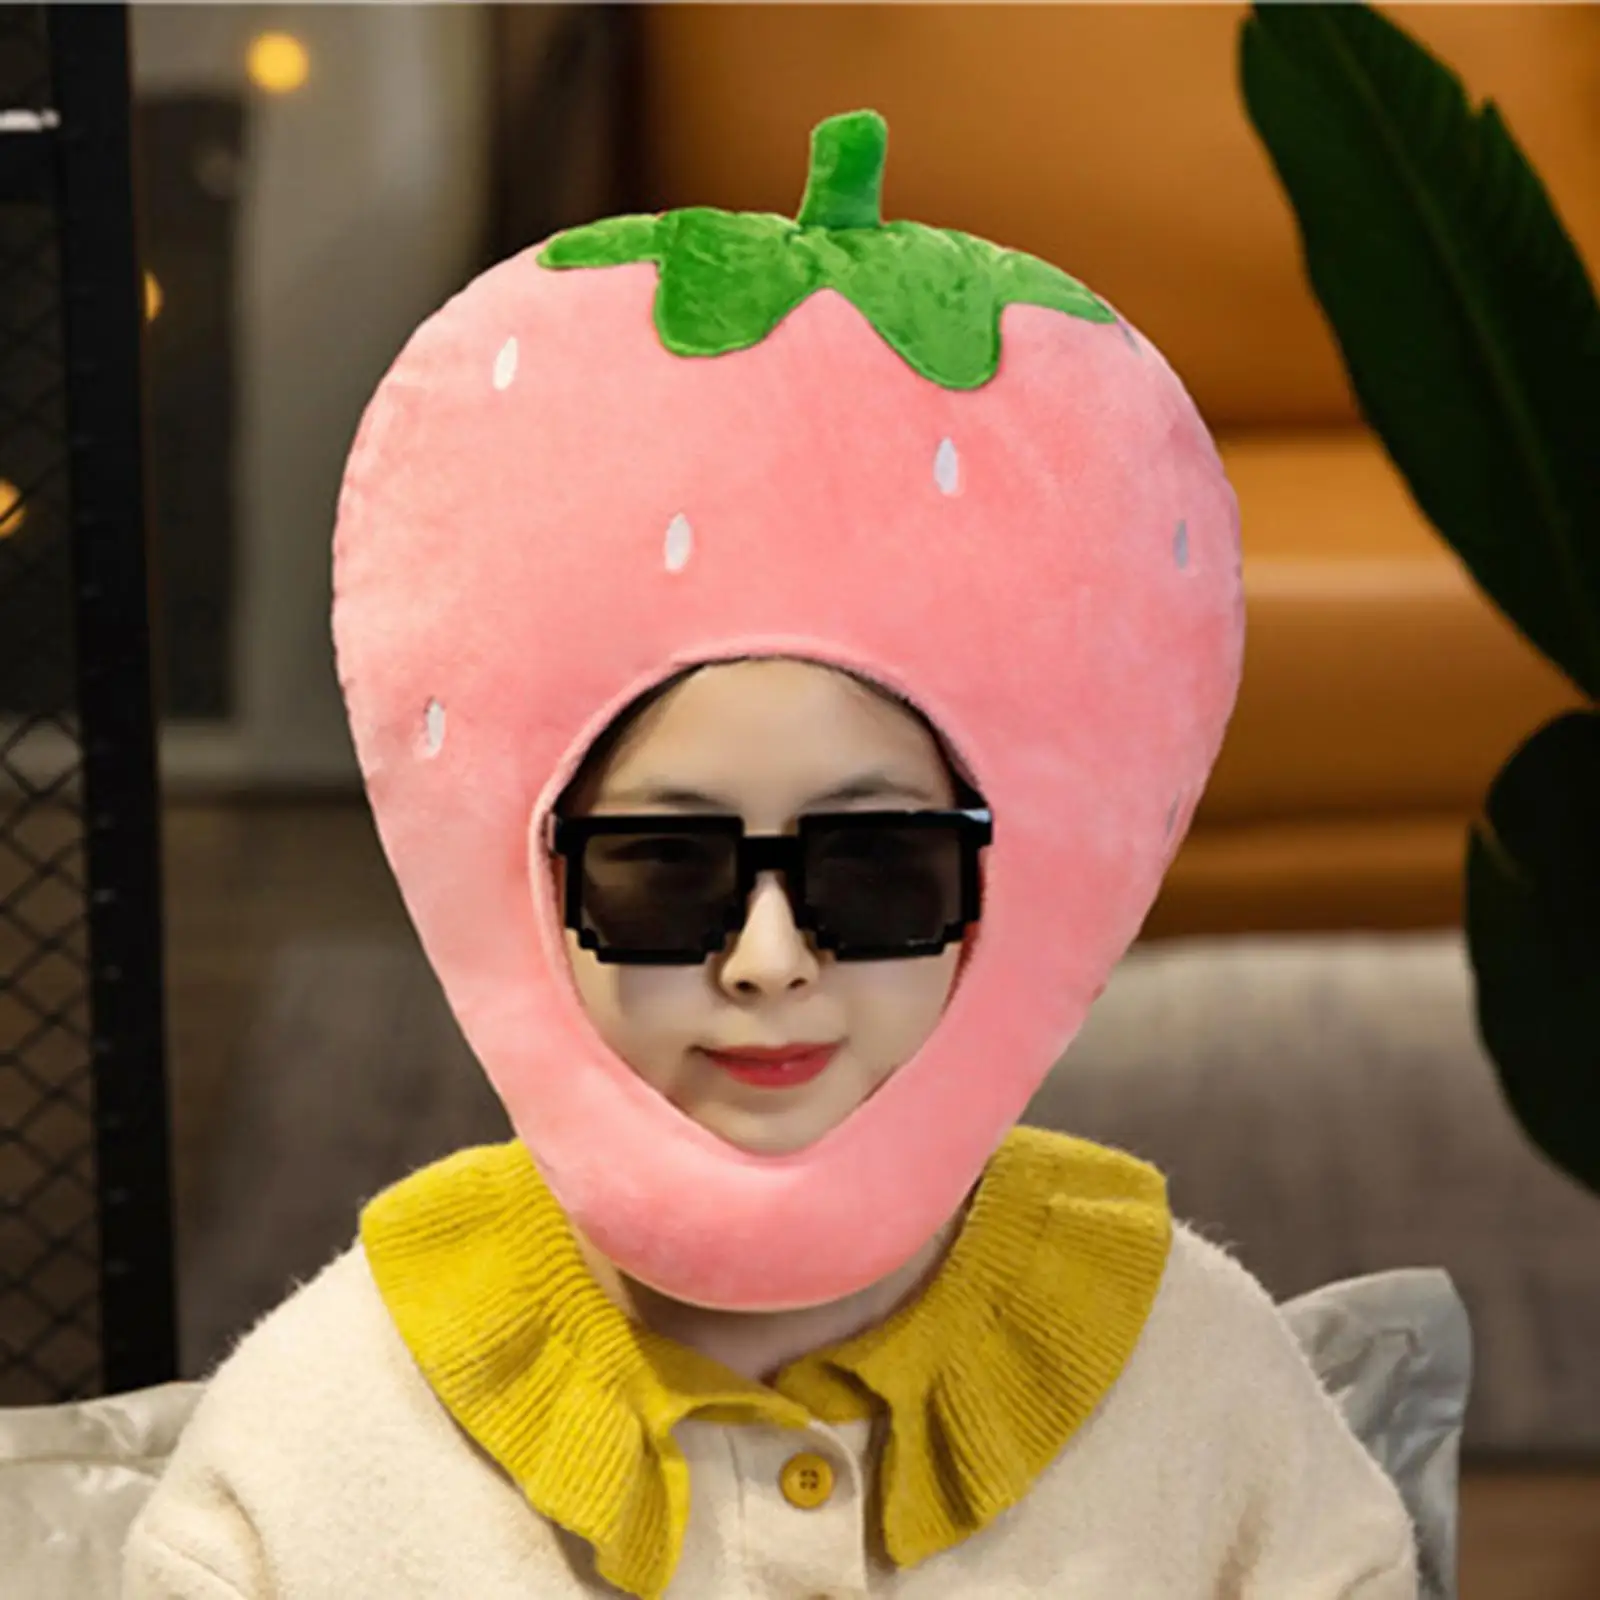 Cute Strawberry Hat Decorative Head Cover Costume Photo Prop for Adults